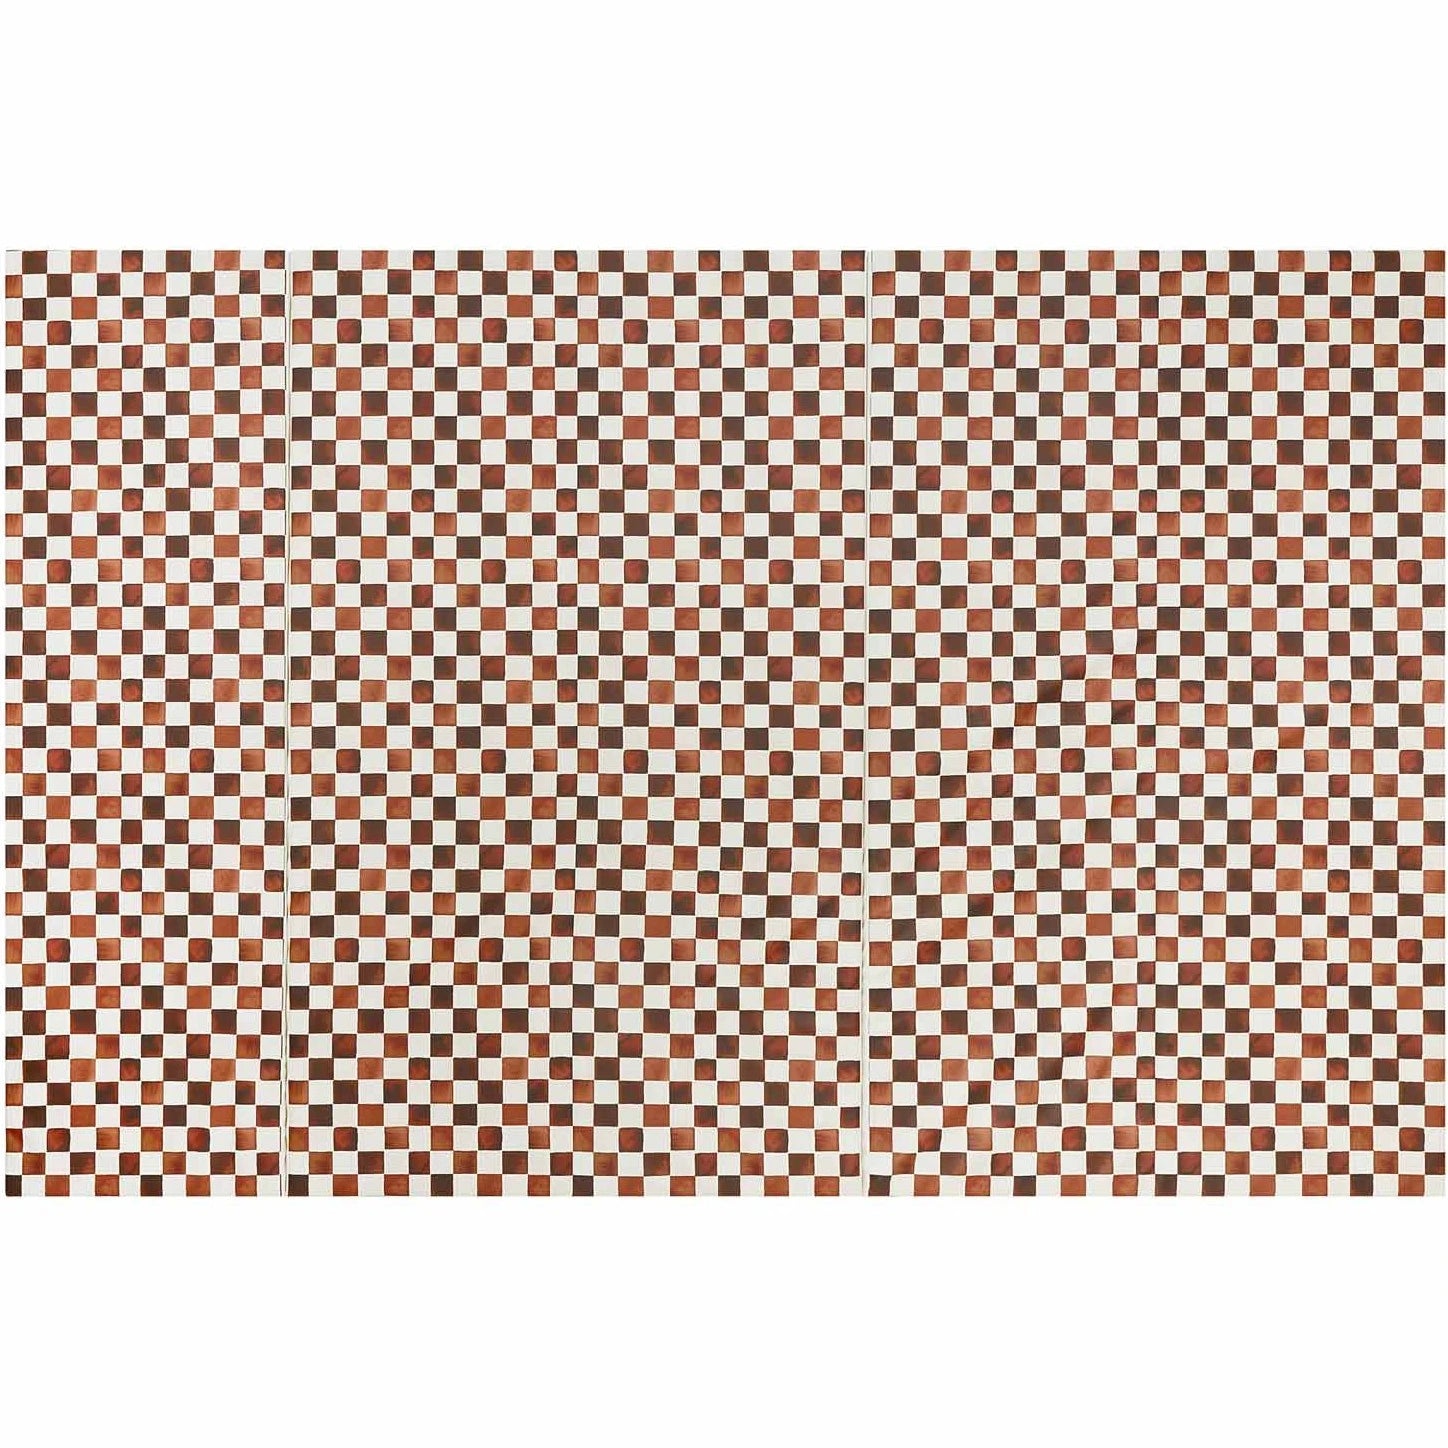 Overhead image of the checker cocoa brown and white geometric print tumbling mat in size 5x7.5